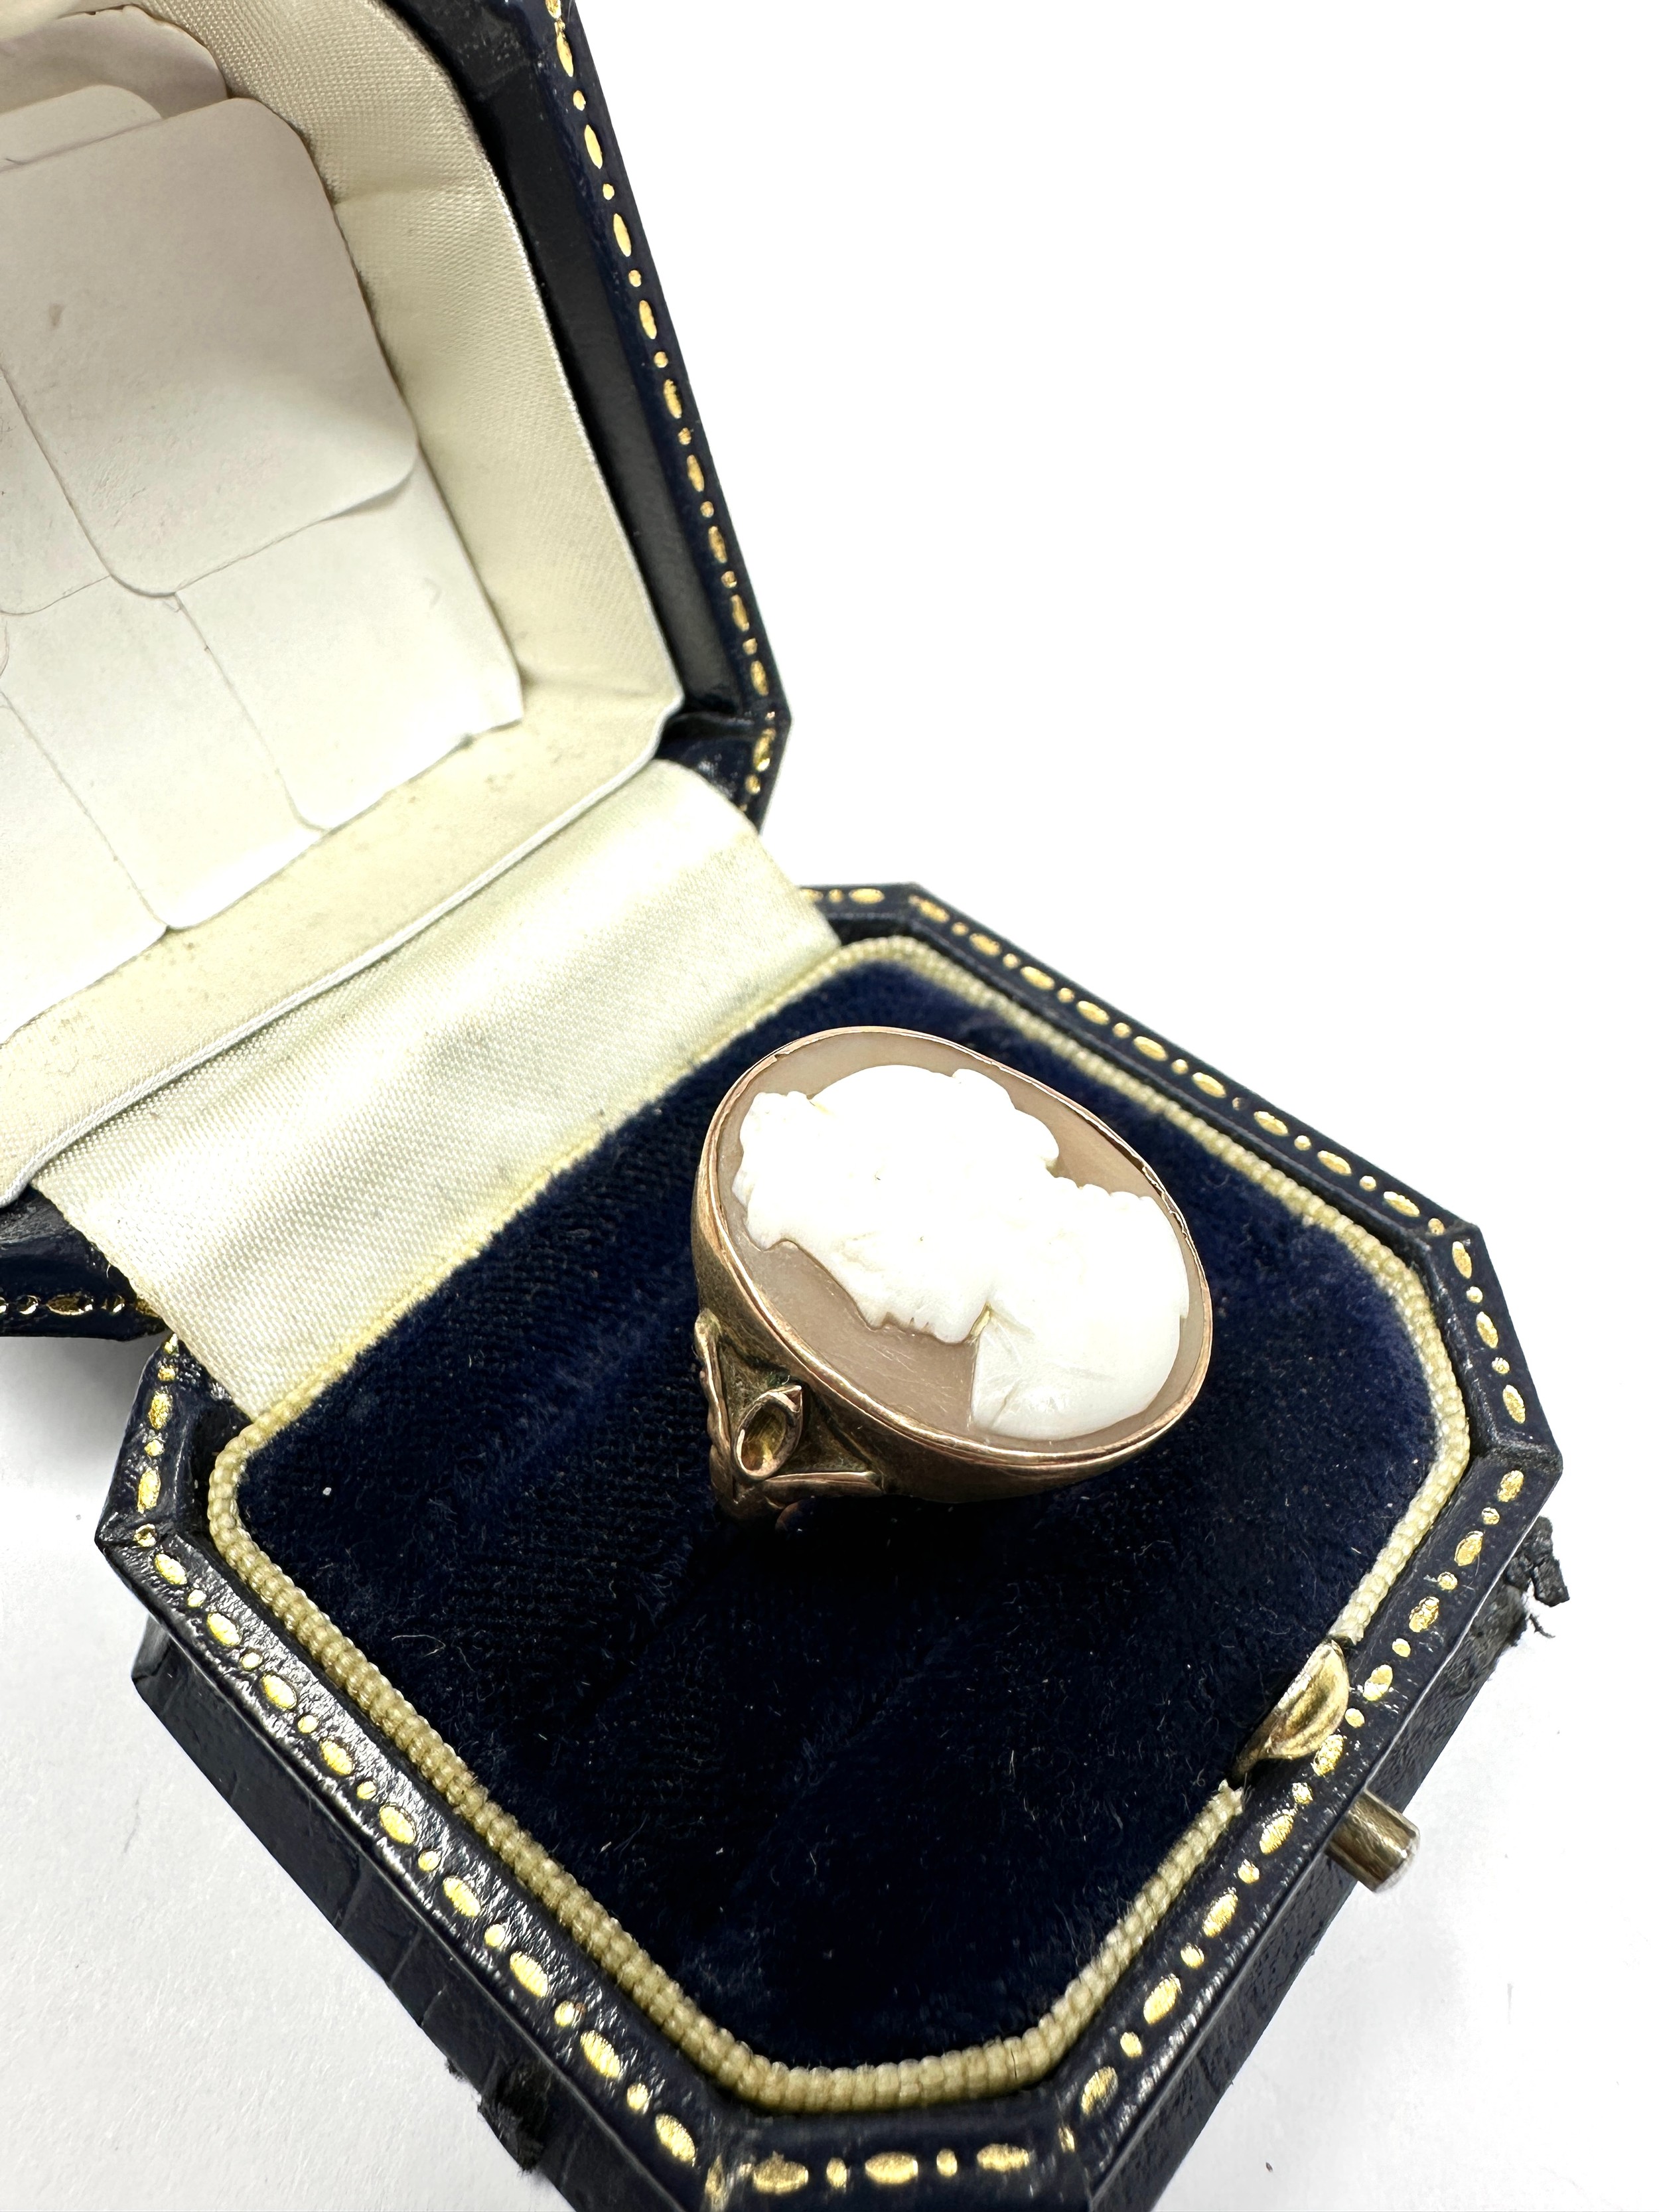 9ct Gold Cameo Ring (3.1g) - Image 2 of 3